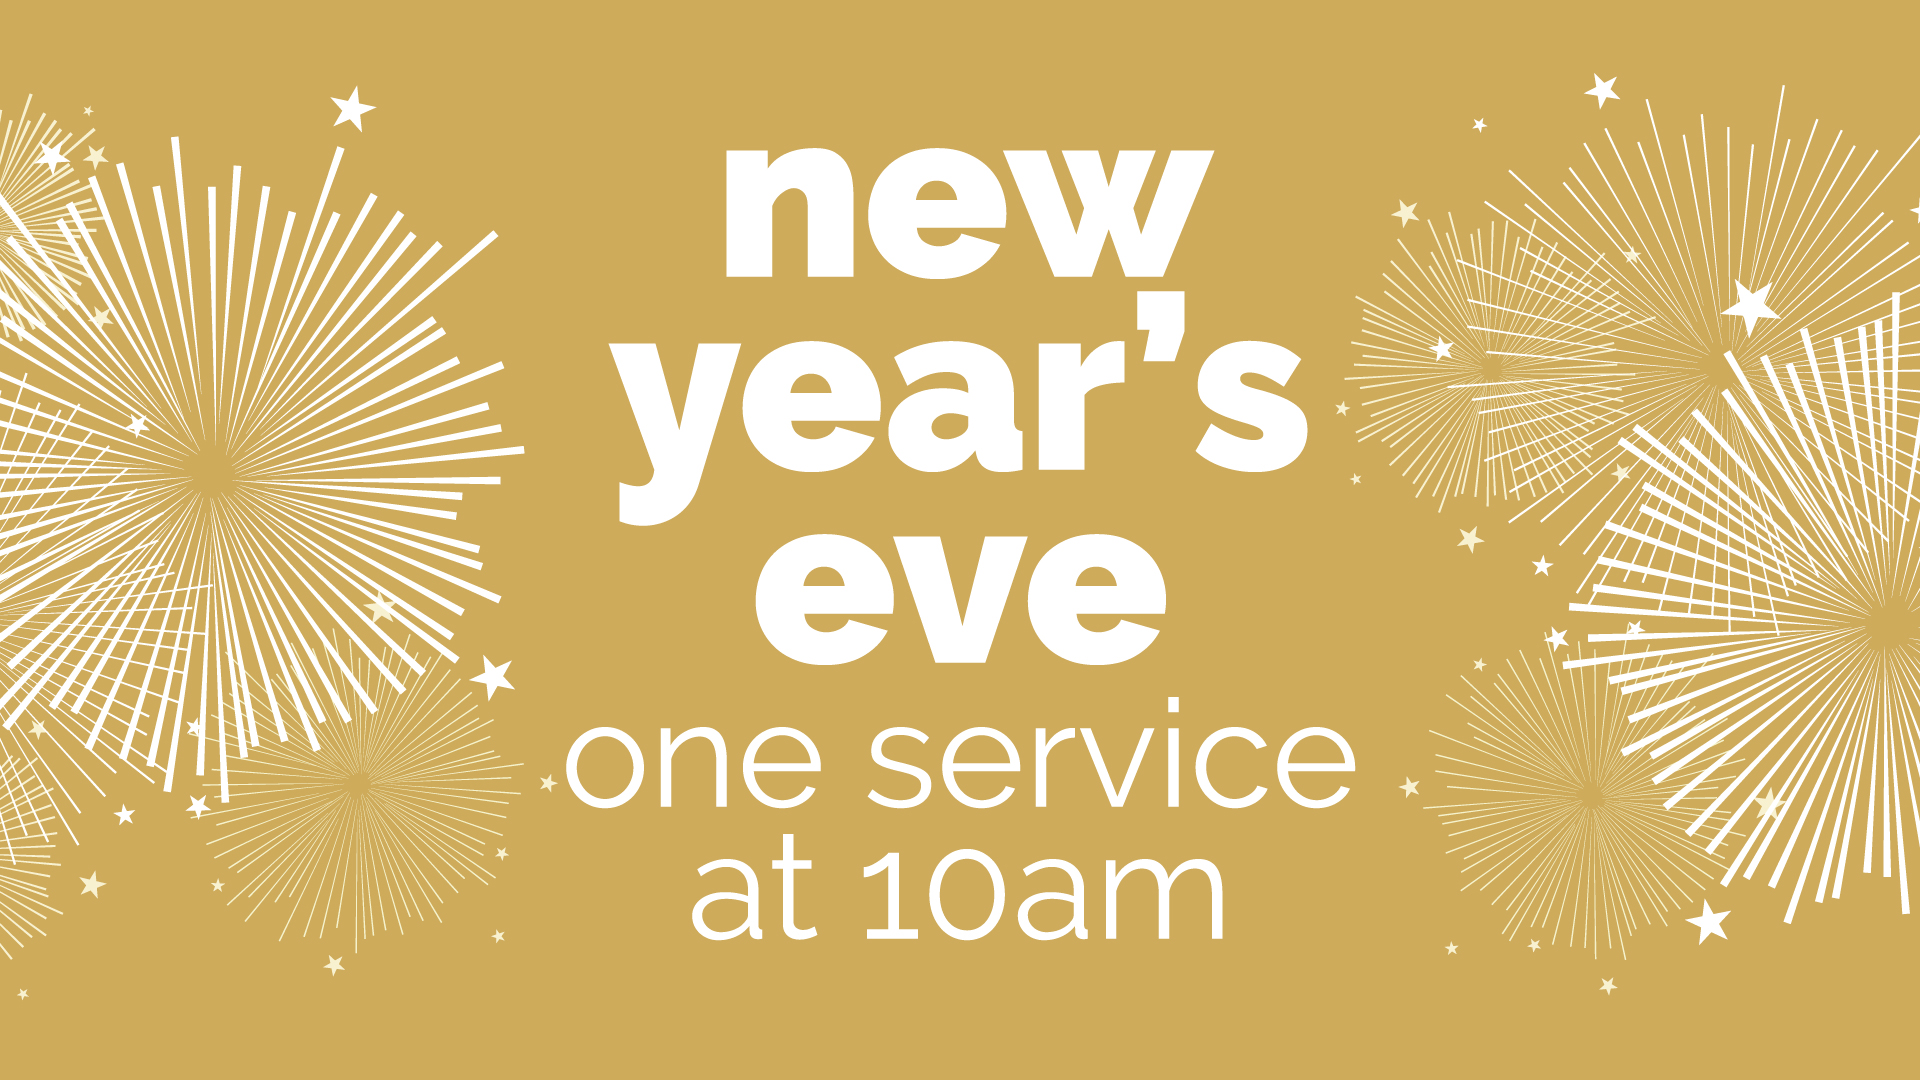 New Year's Eve | One service at 10am